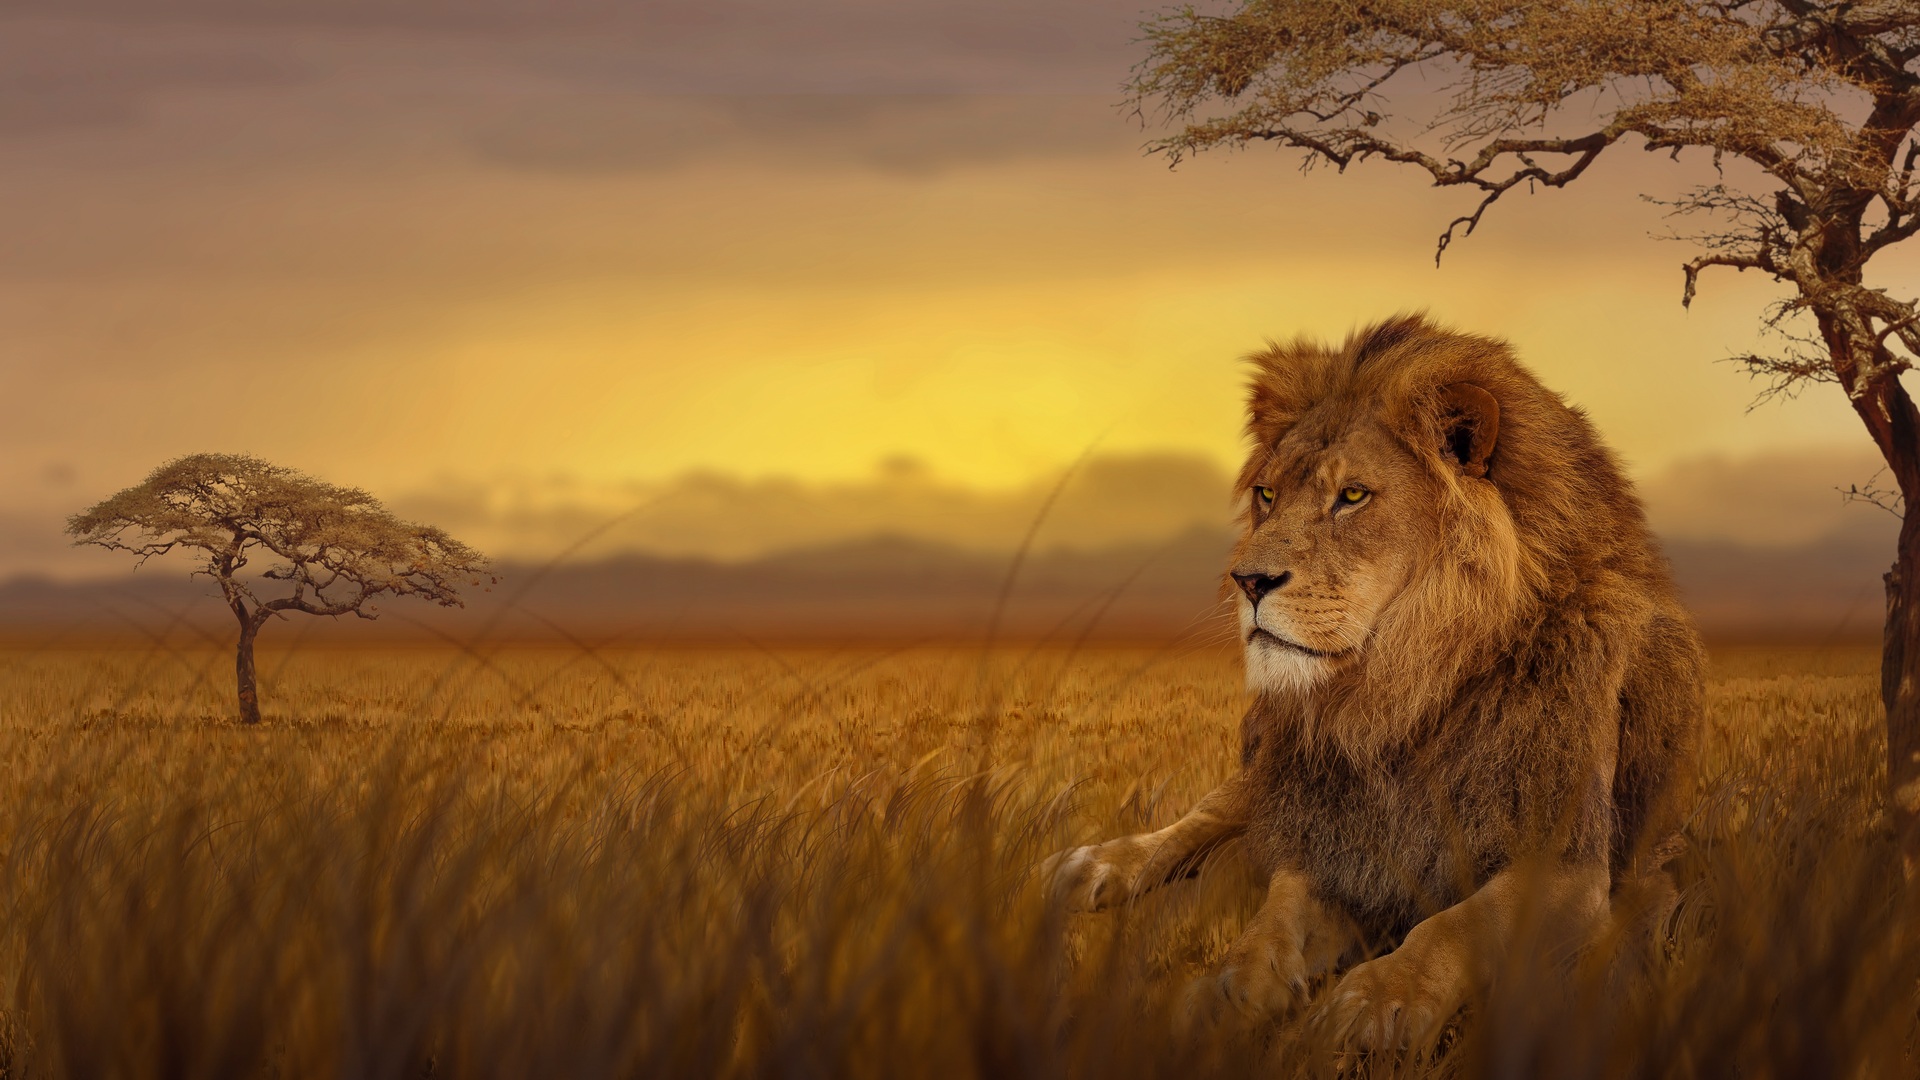 70 The Lion King 2019  Android iPhone Desktop HD Backgrounds   Wallpapers 1080p 4k png  jpg 2023